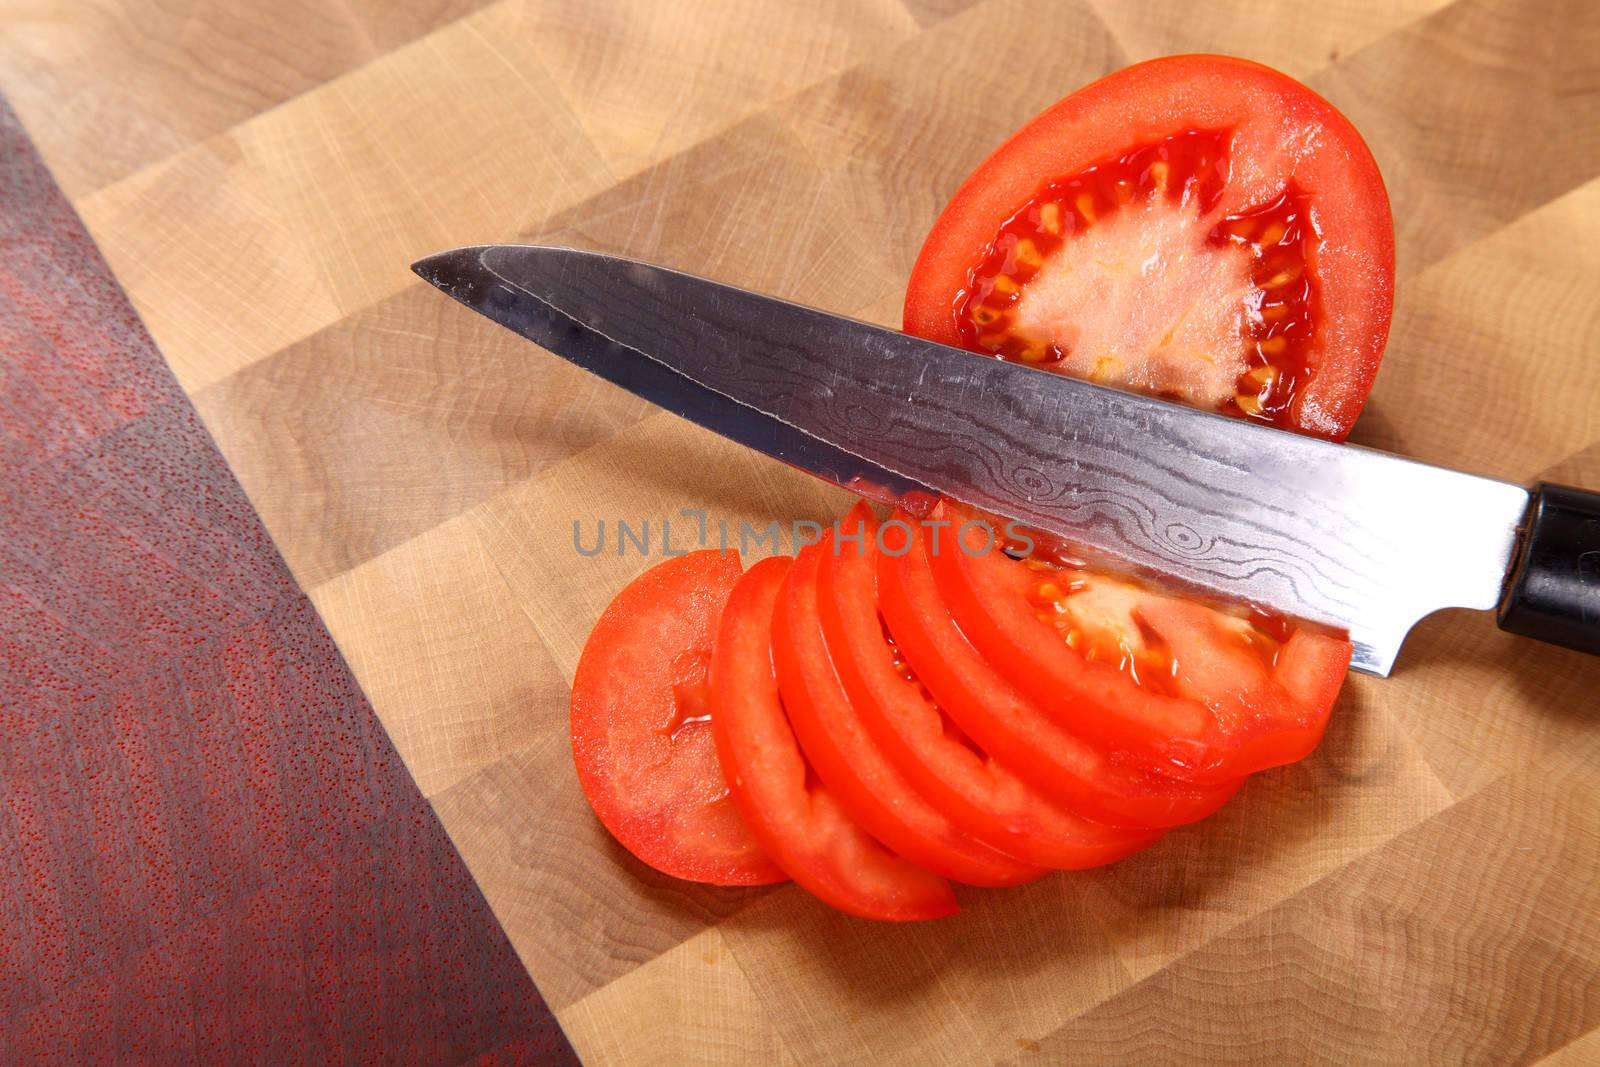 the tomato cut by means of a knife on a chopping board
